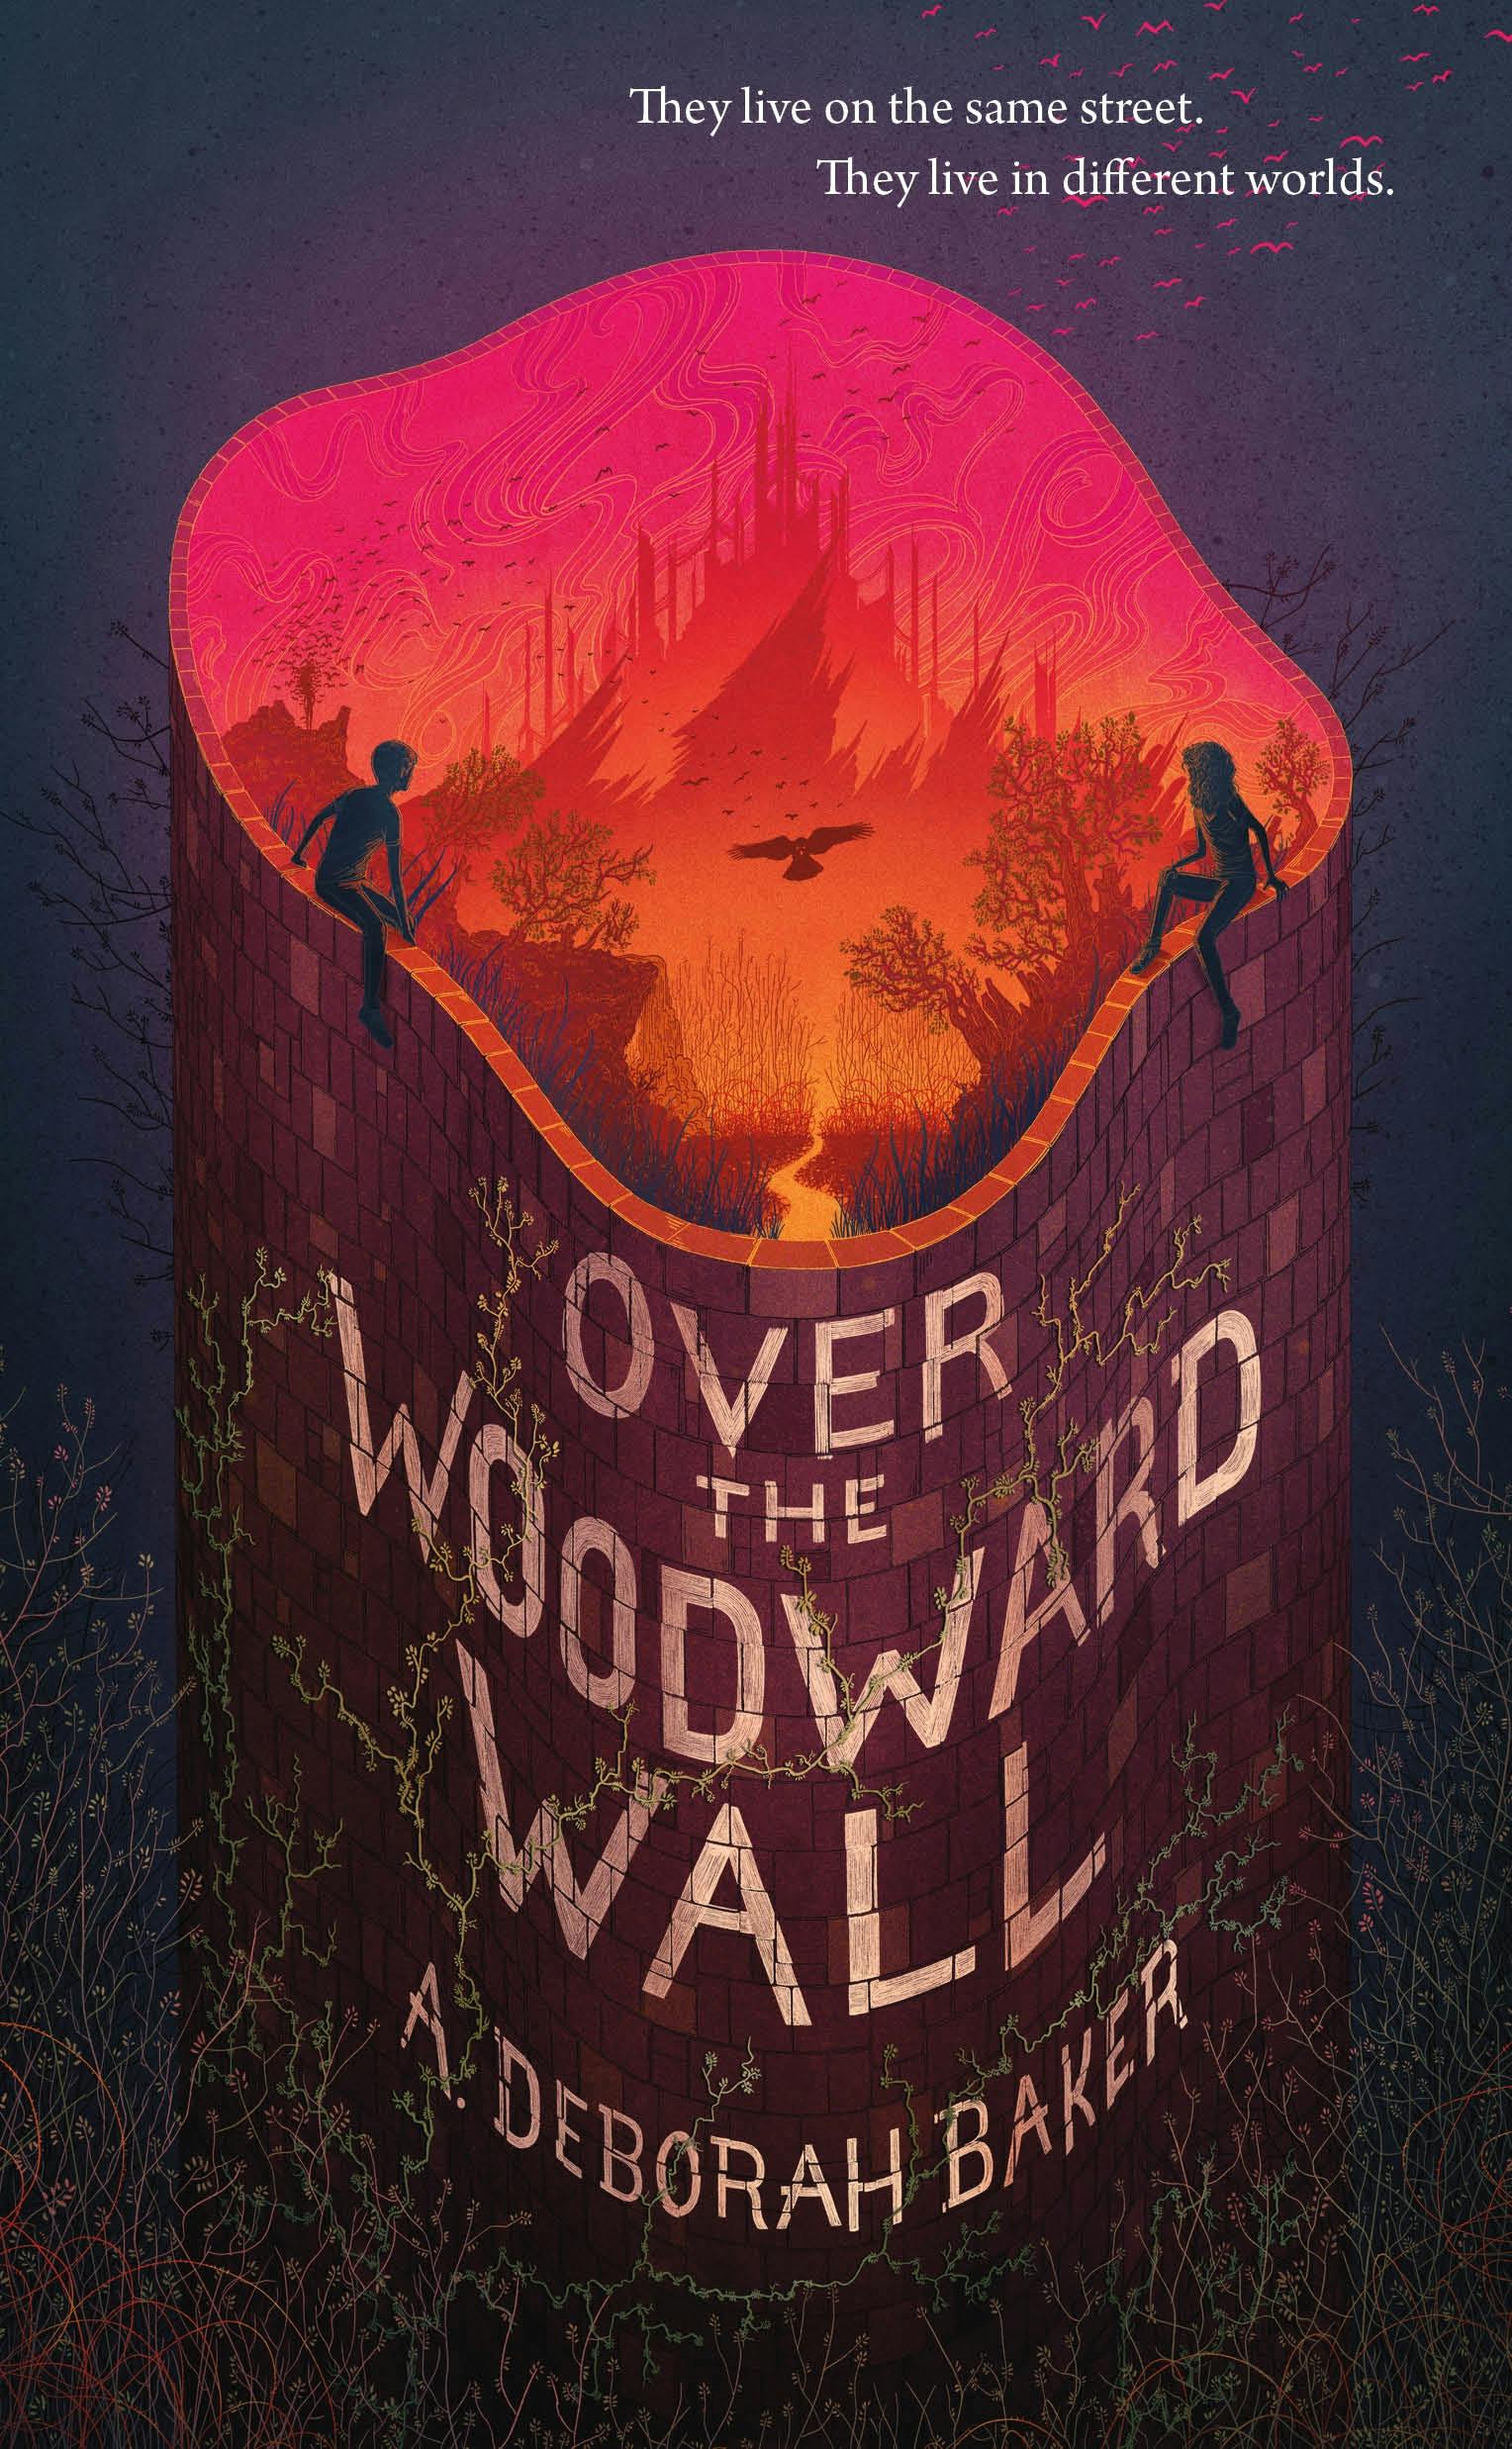 Cover for the book titled as: Over the Woodward Wall